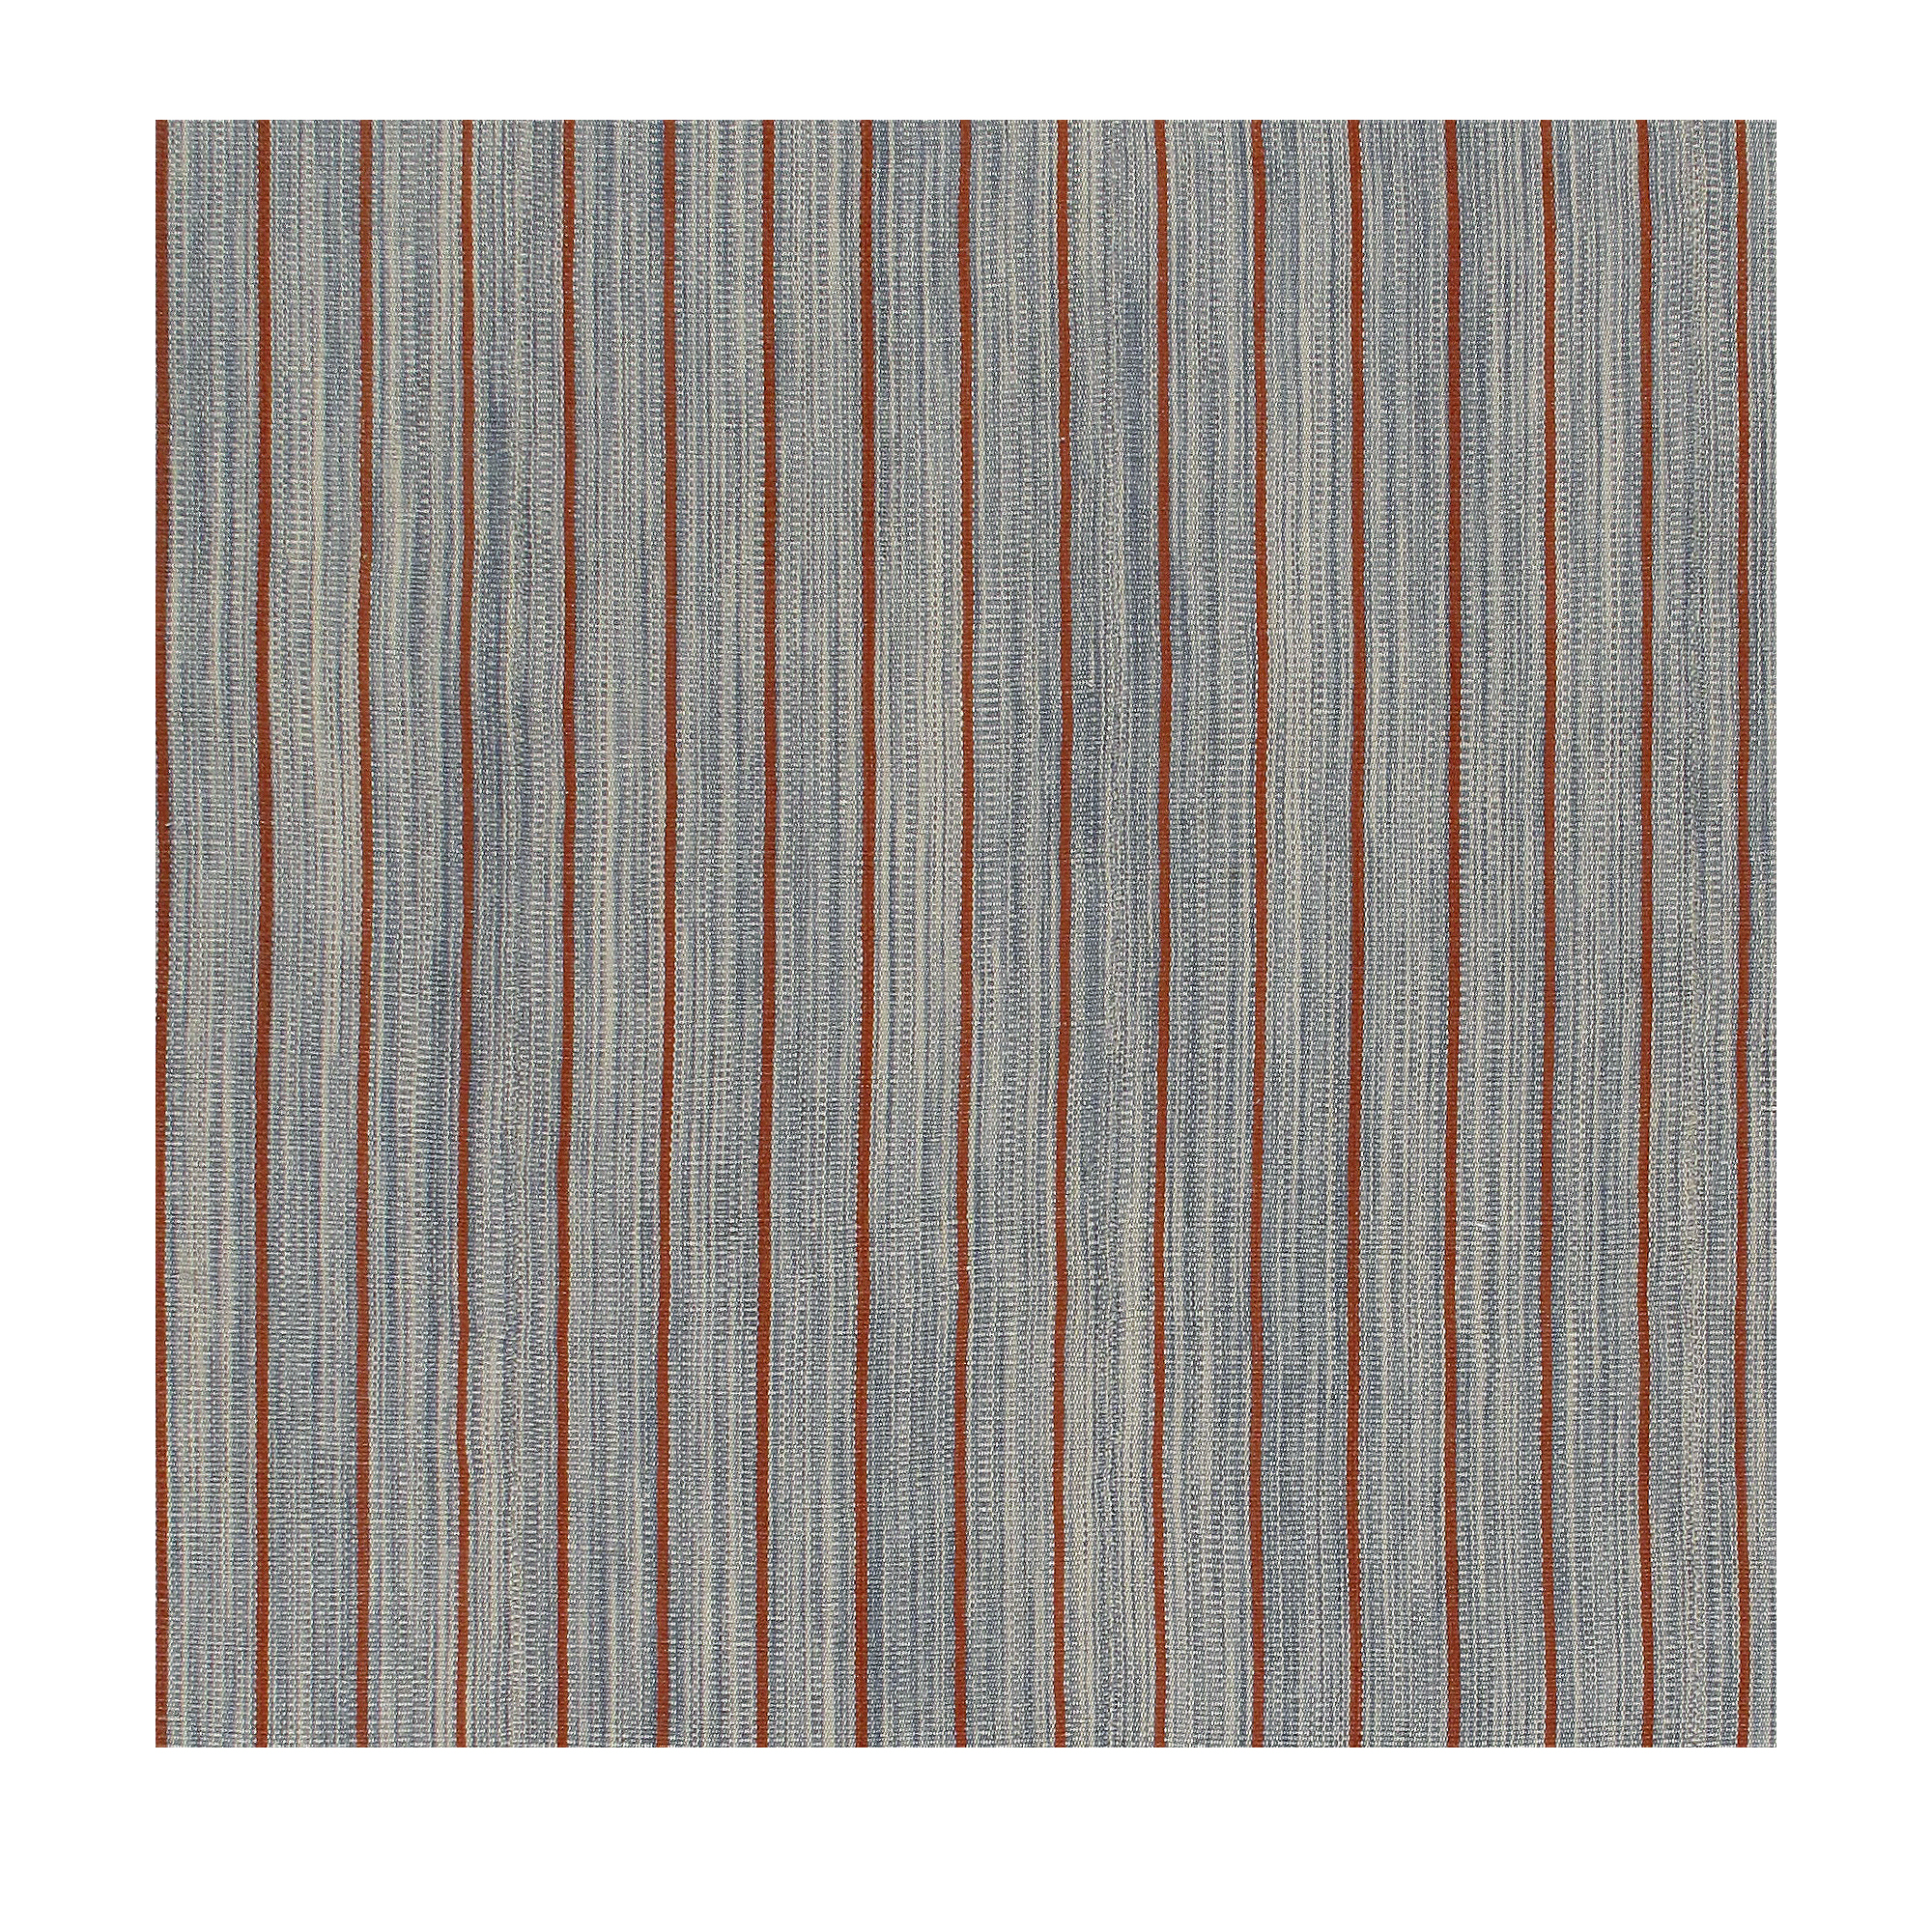 This Pelas flatweave rug is made with handspun wool and natural dyes.